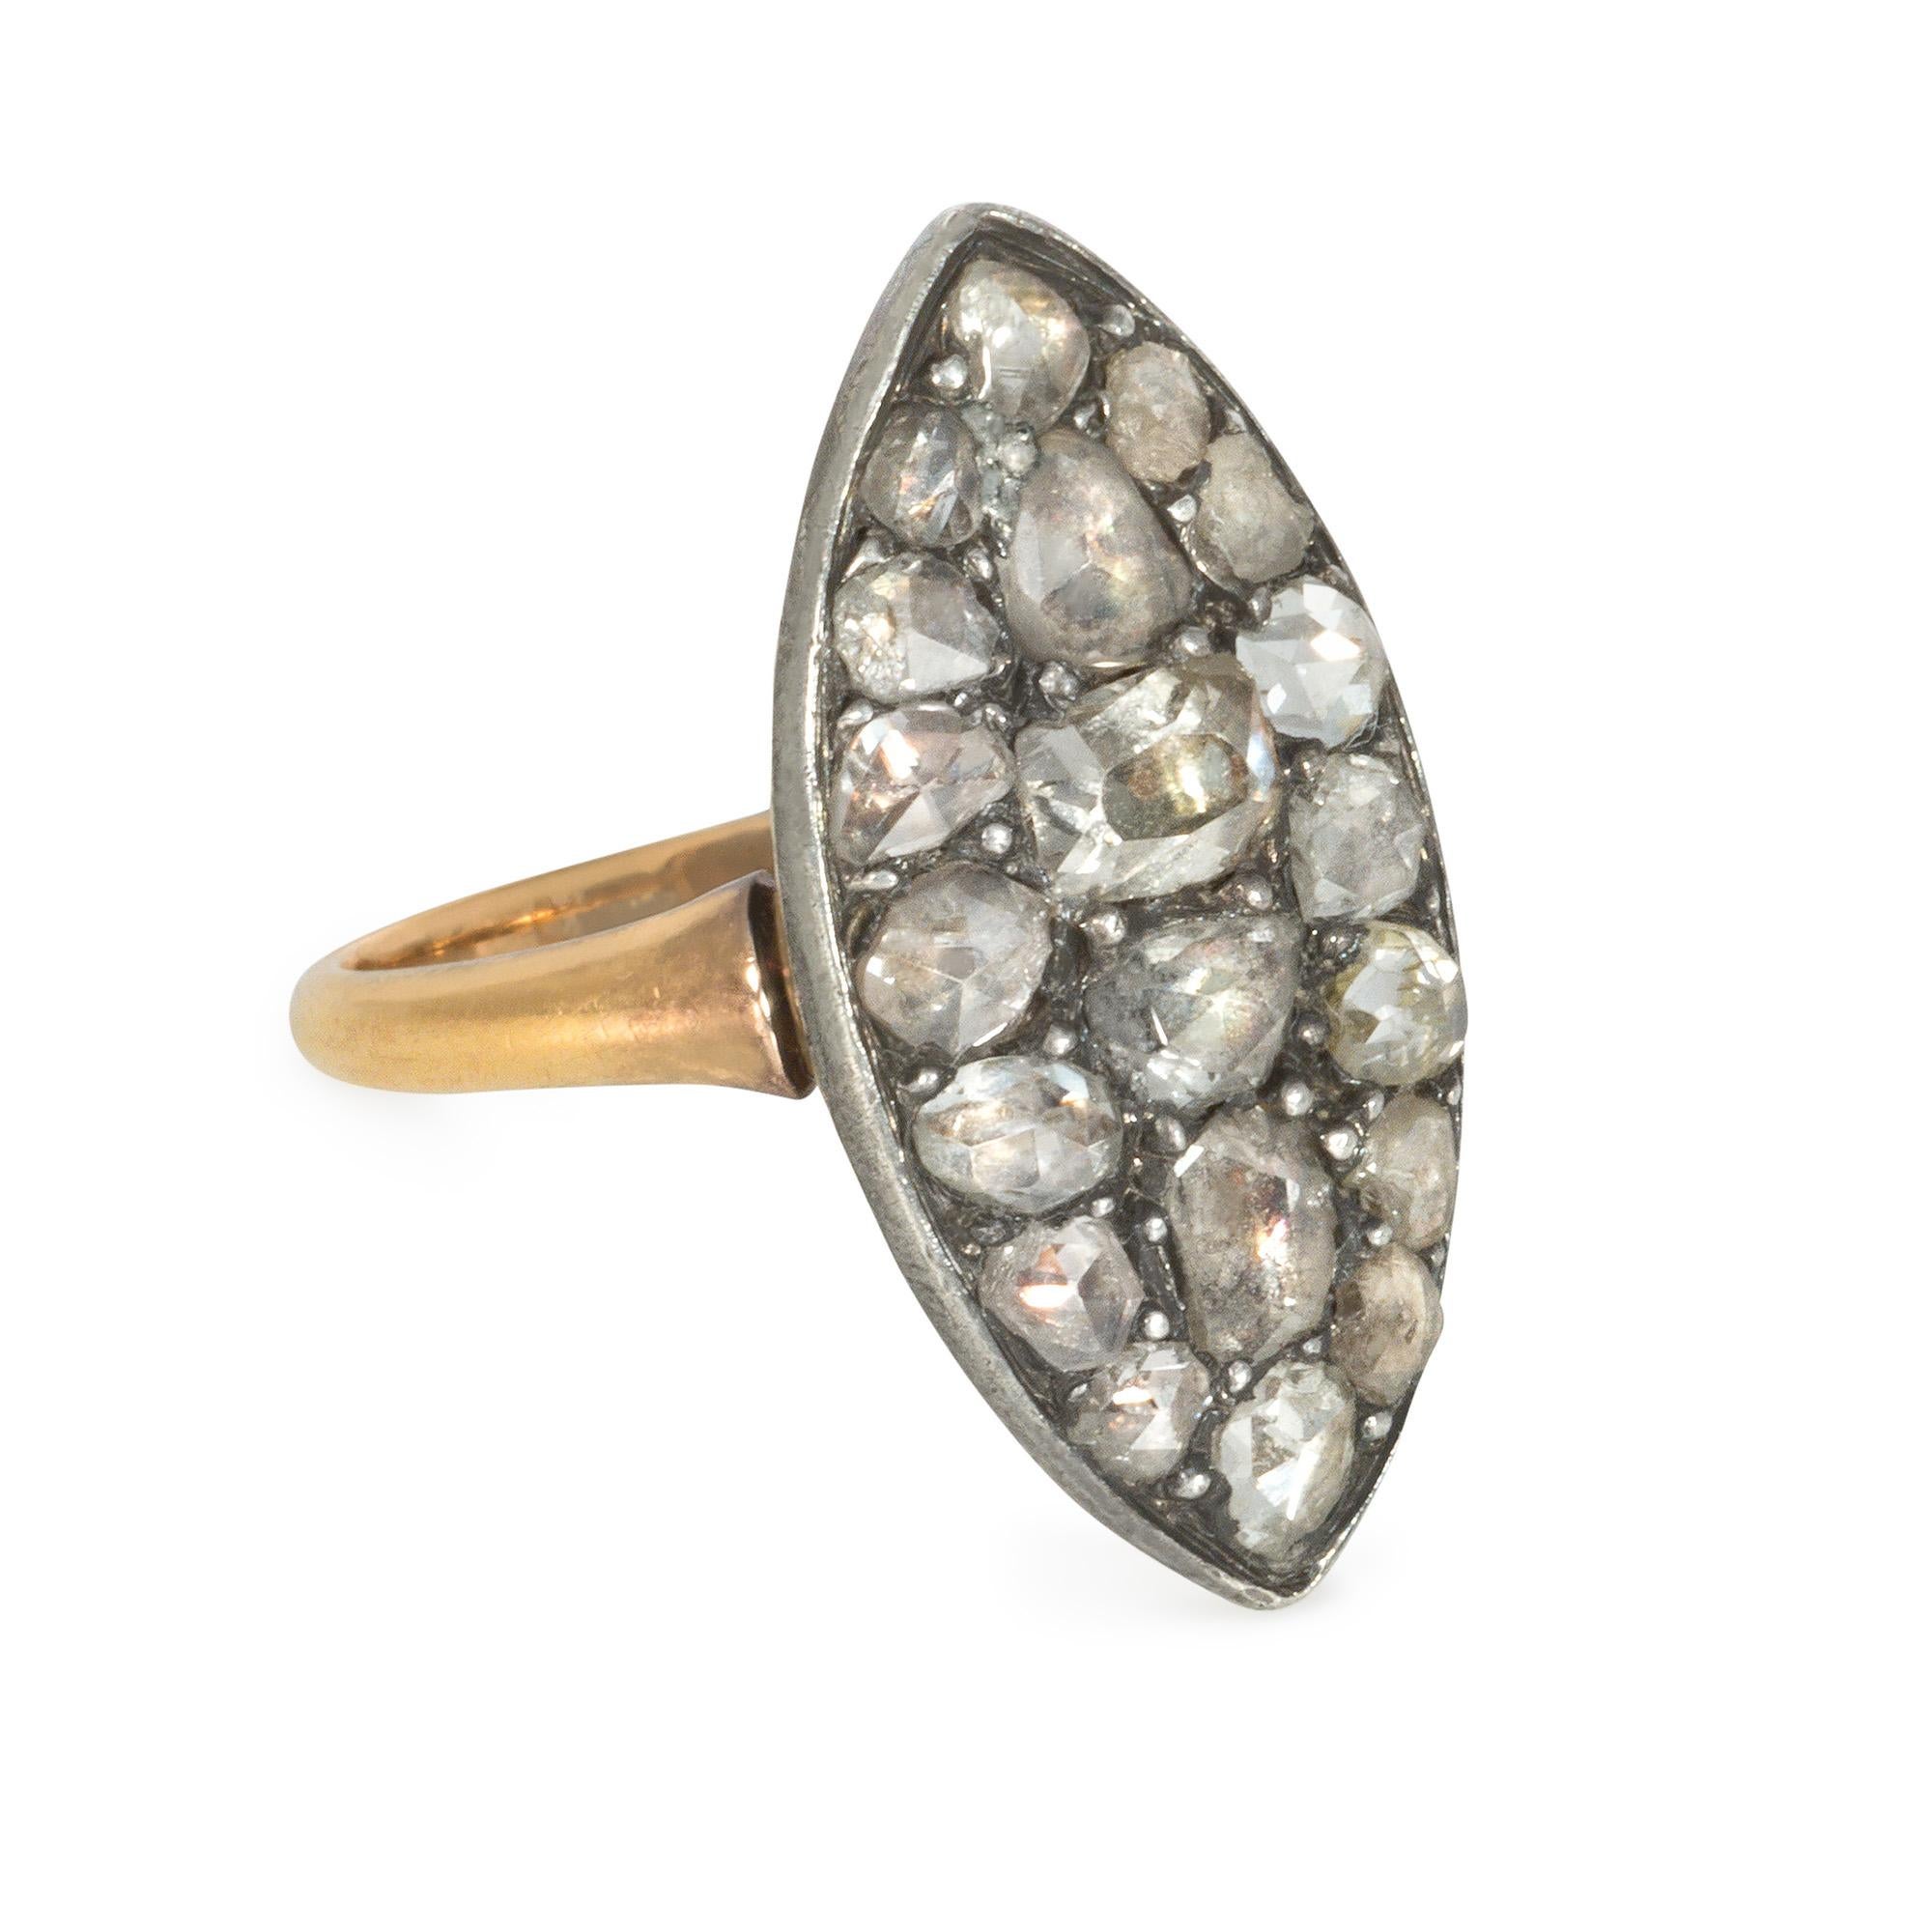 An antique early 19th century navette-shaped rose-cut diamond plaque ring in silver and 18k gold.  France

Face-up: 7/8